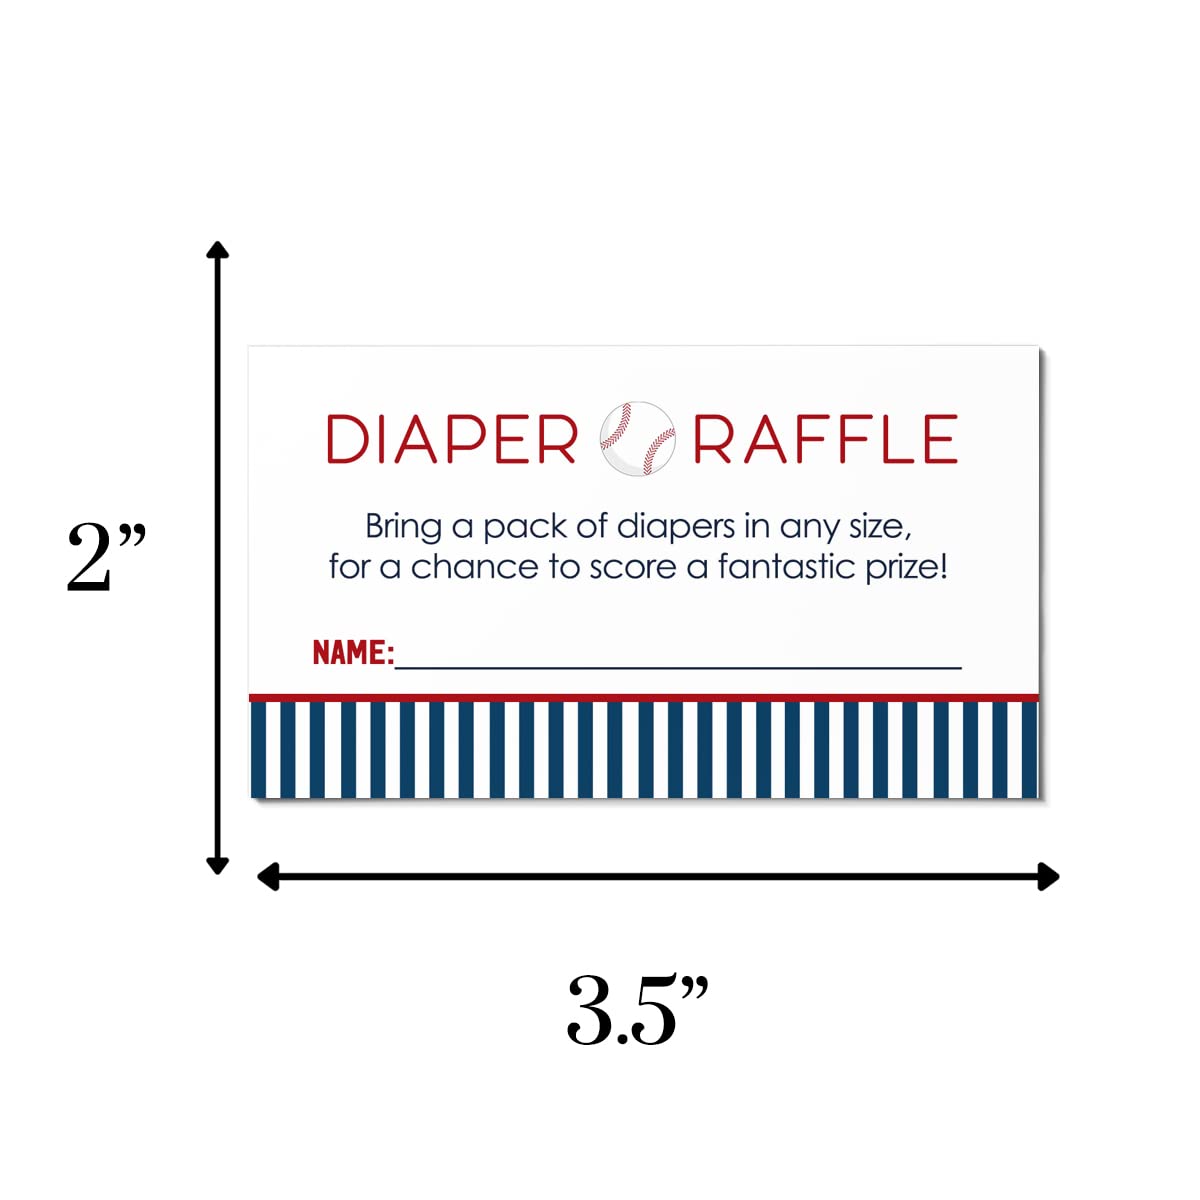 Baseball Baby Shower Diaper Raffle Tickets (25 Pack) Gender Reveal Party Activity for Drawings Prizes - Sports Invitation Insert – Boy or Girl Theme Red and Blue - 2x3.5 Printed Card Set